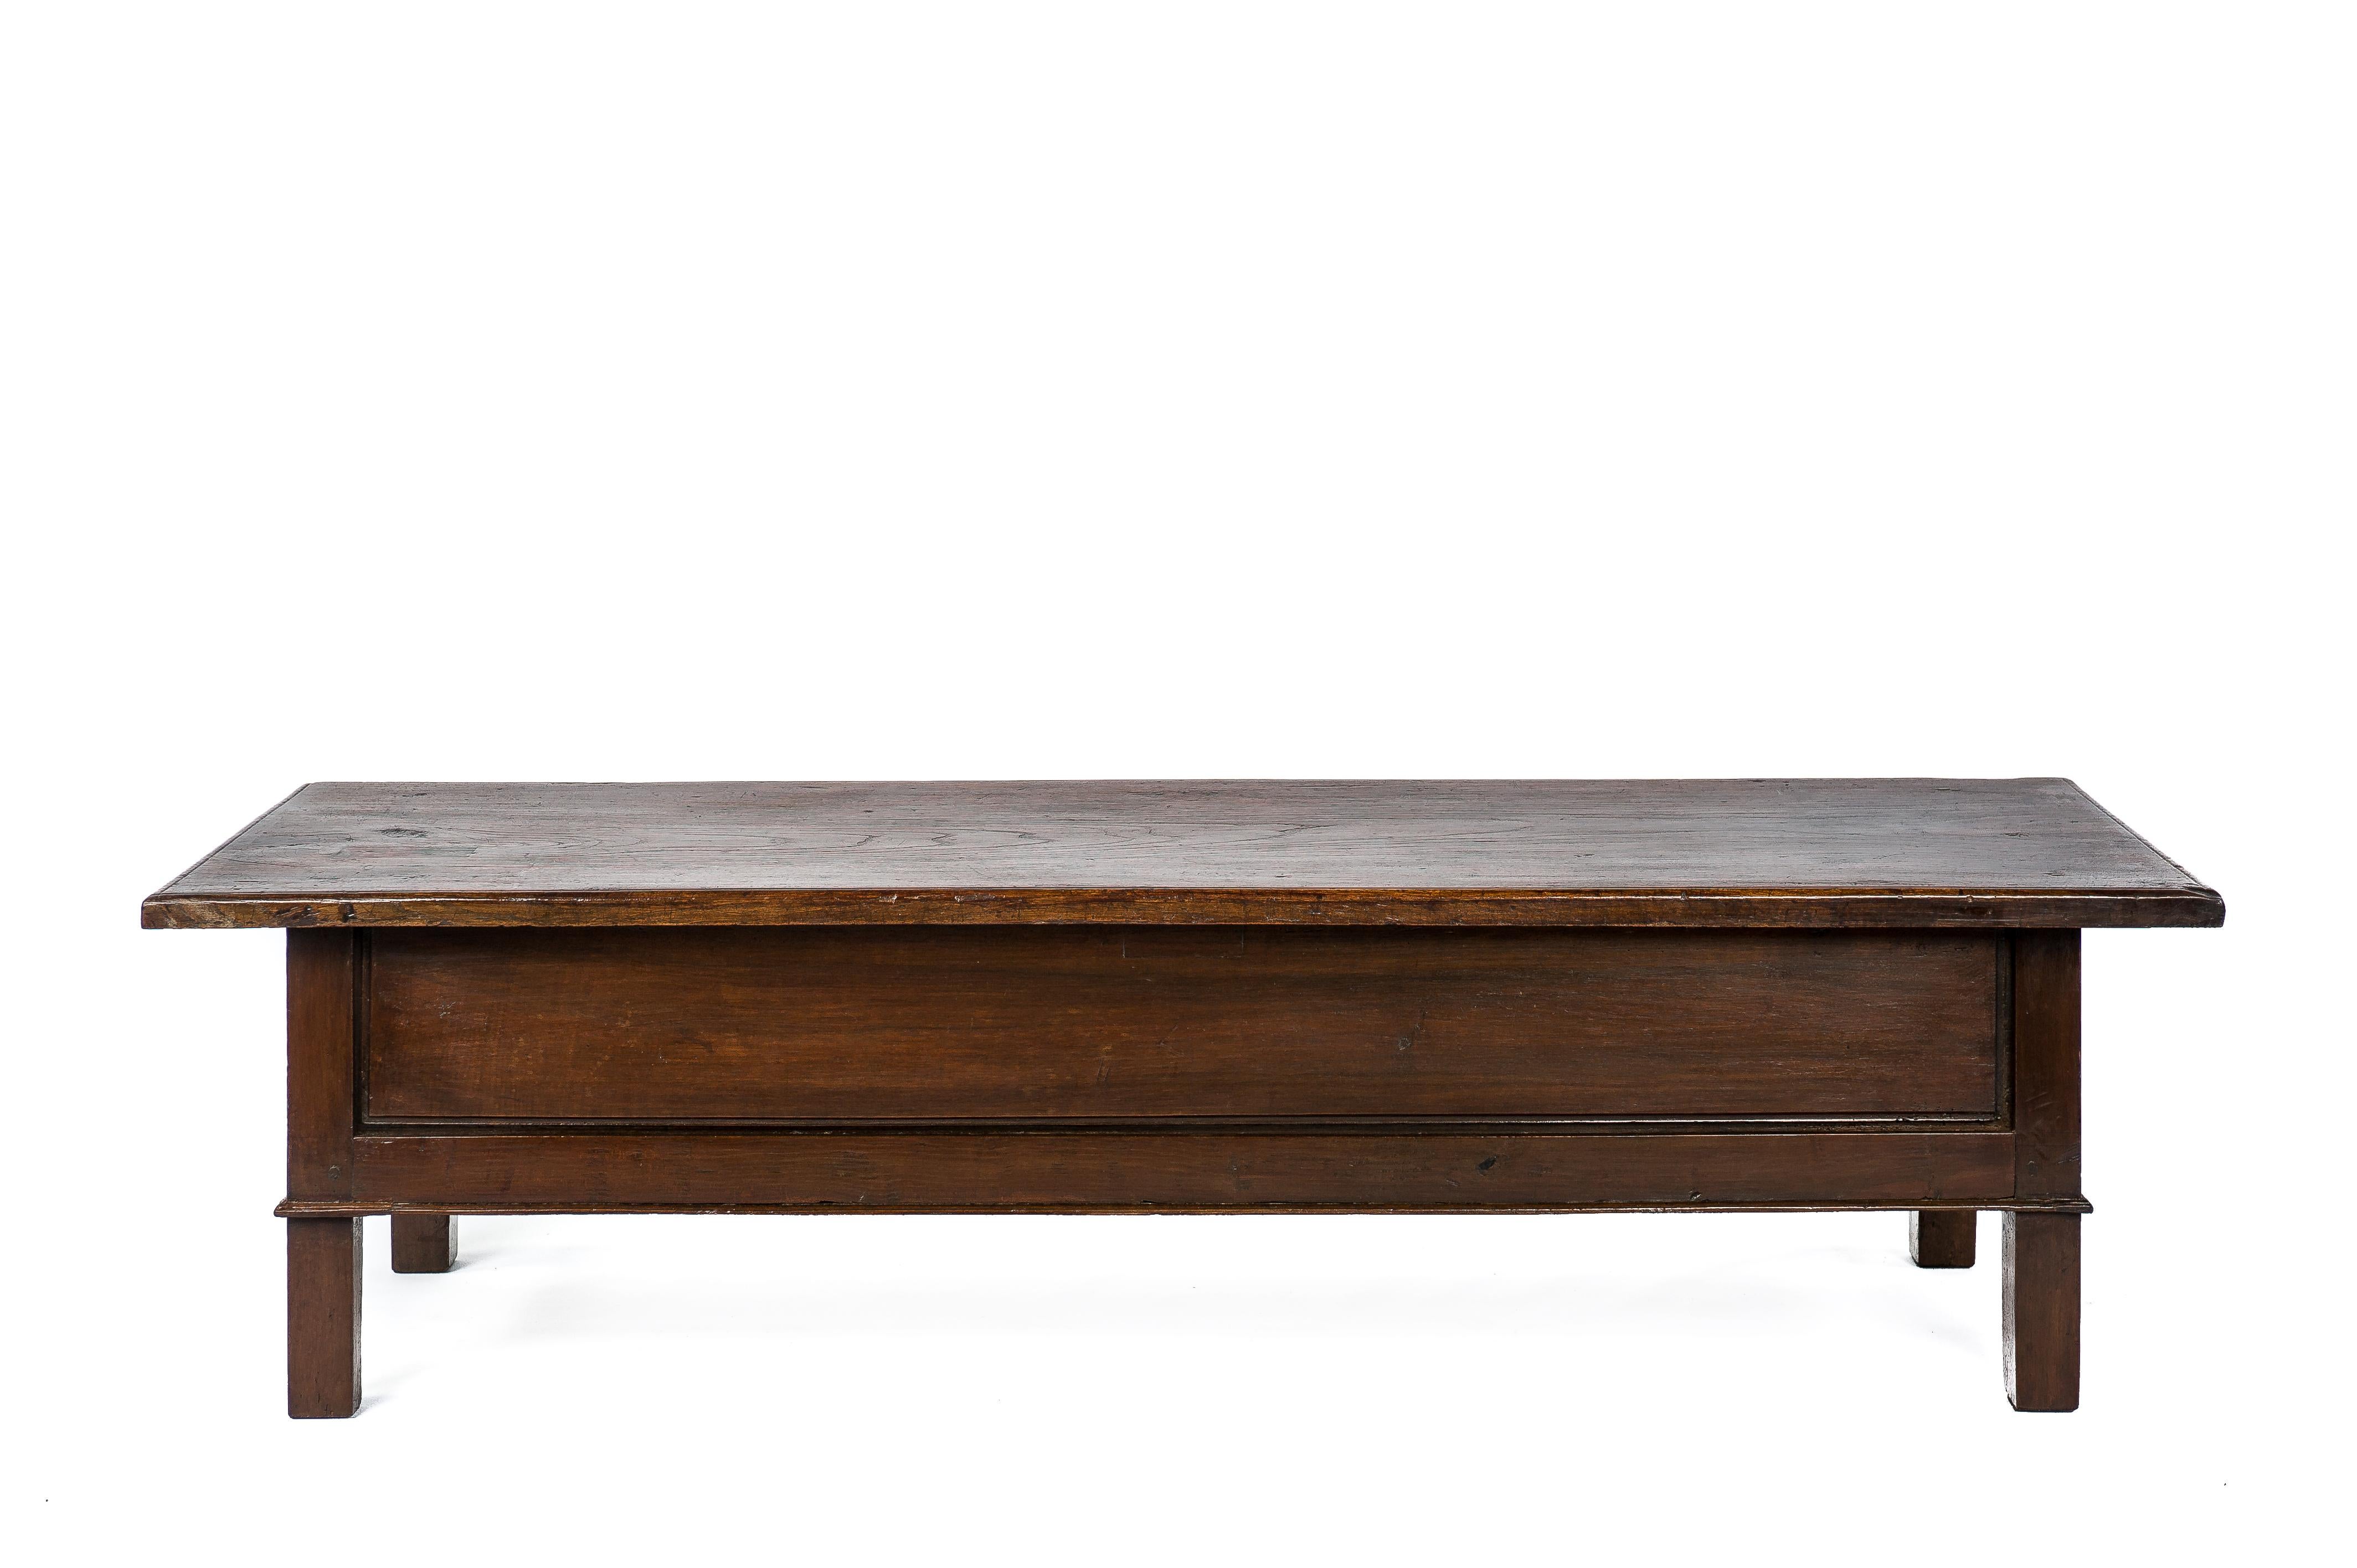 Forged Antique Early 19th Century Warm Brown Spanish Chestnut Coffee Table